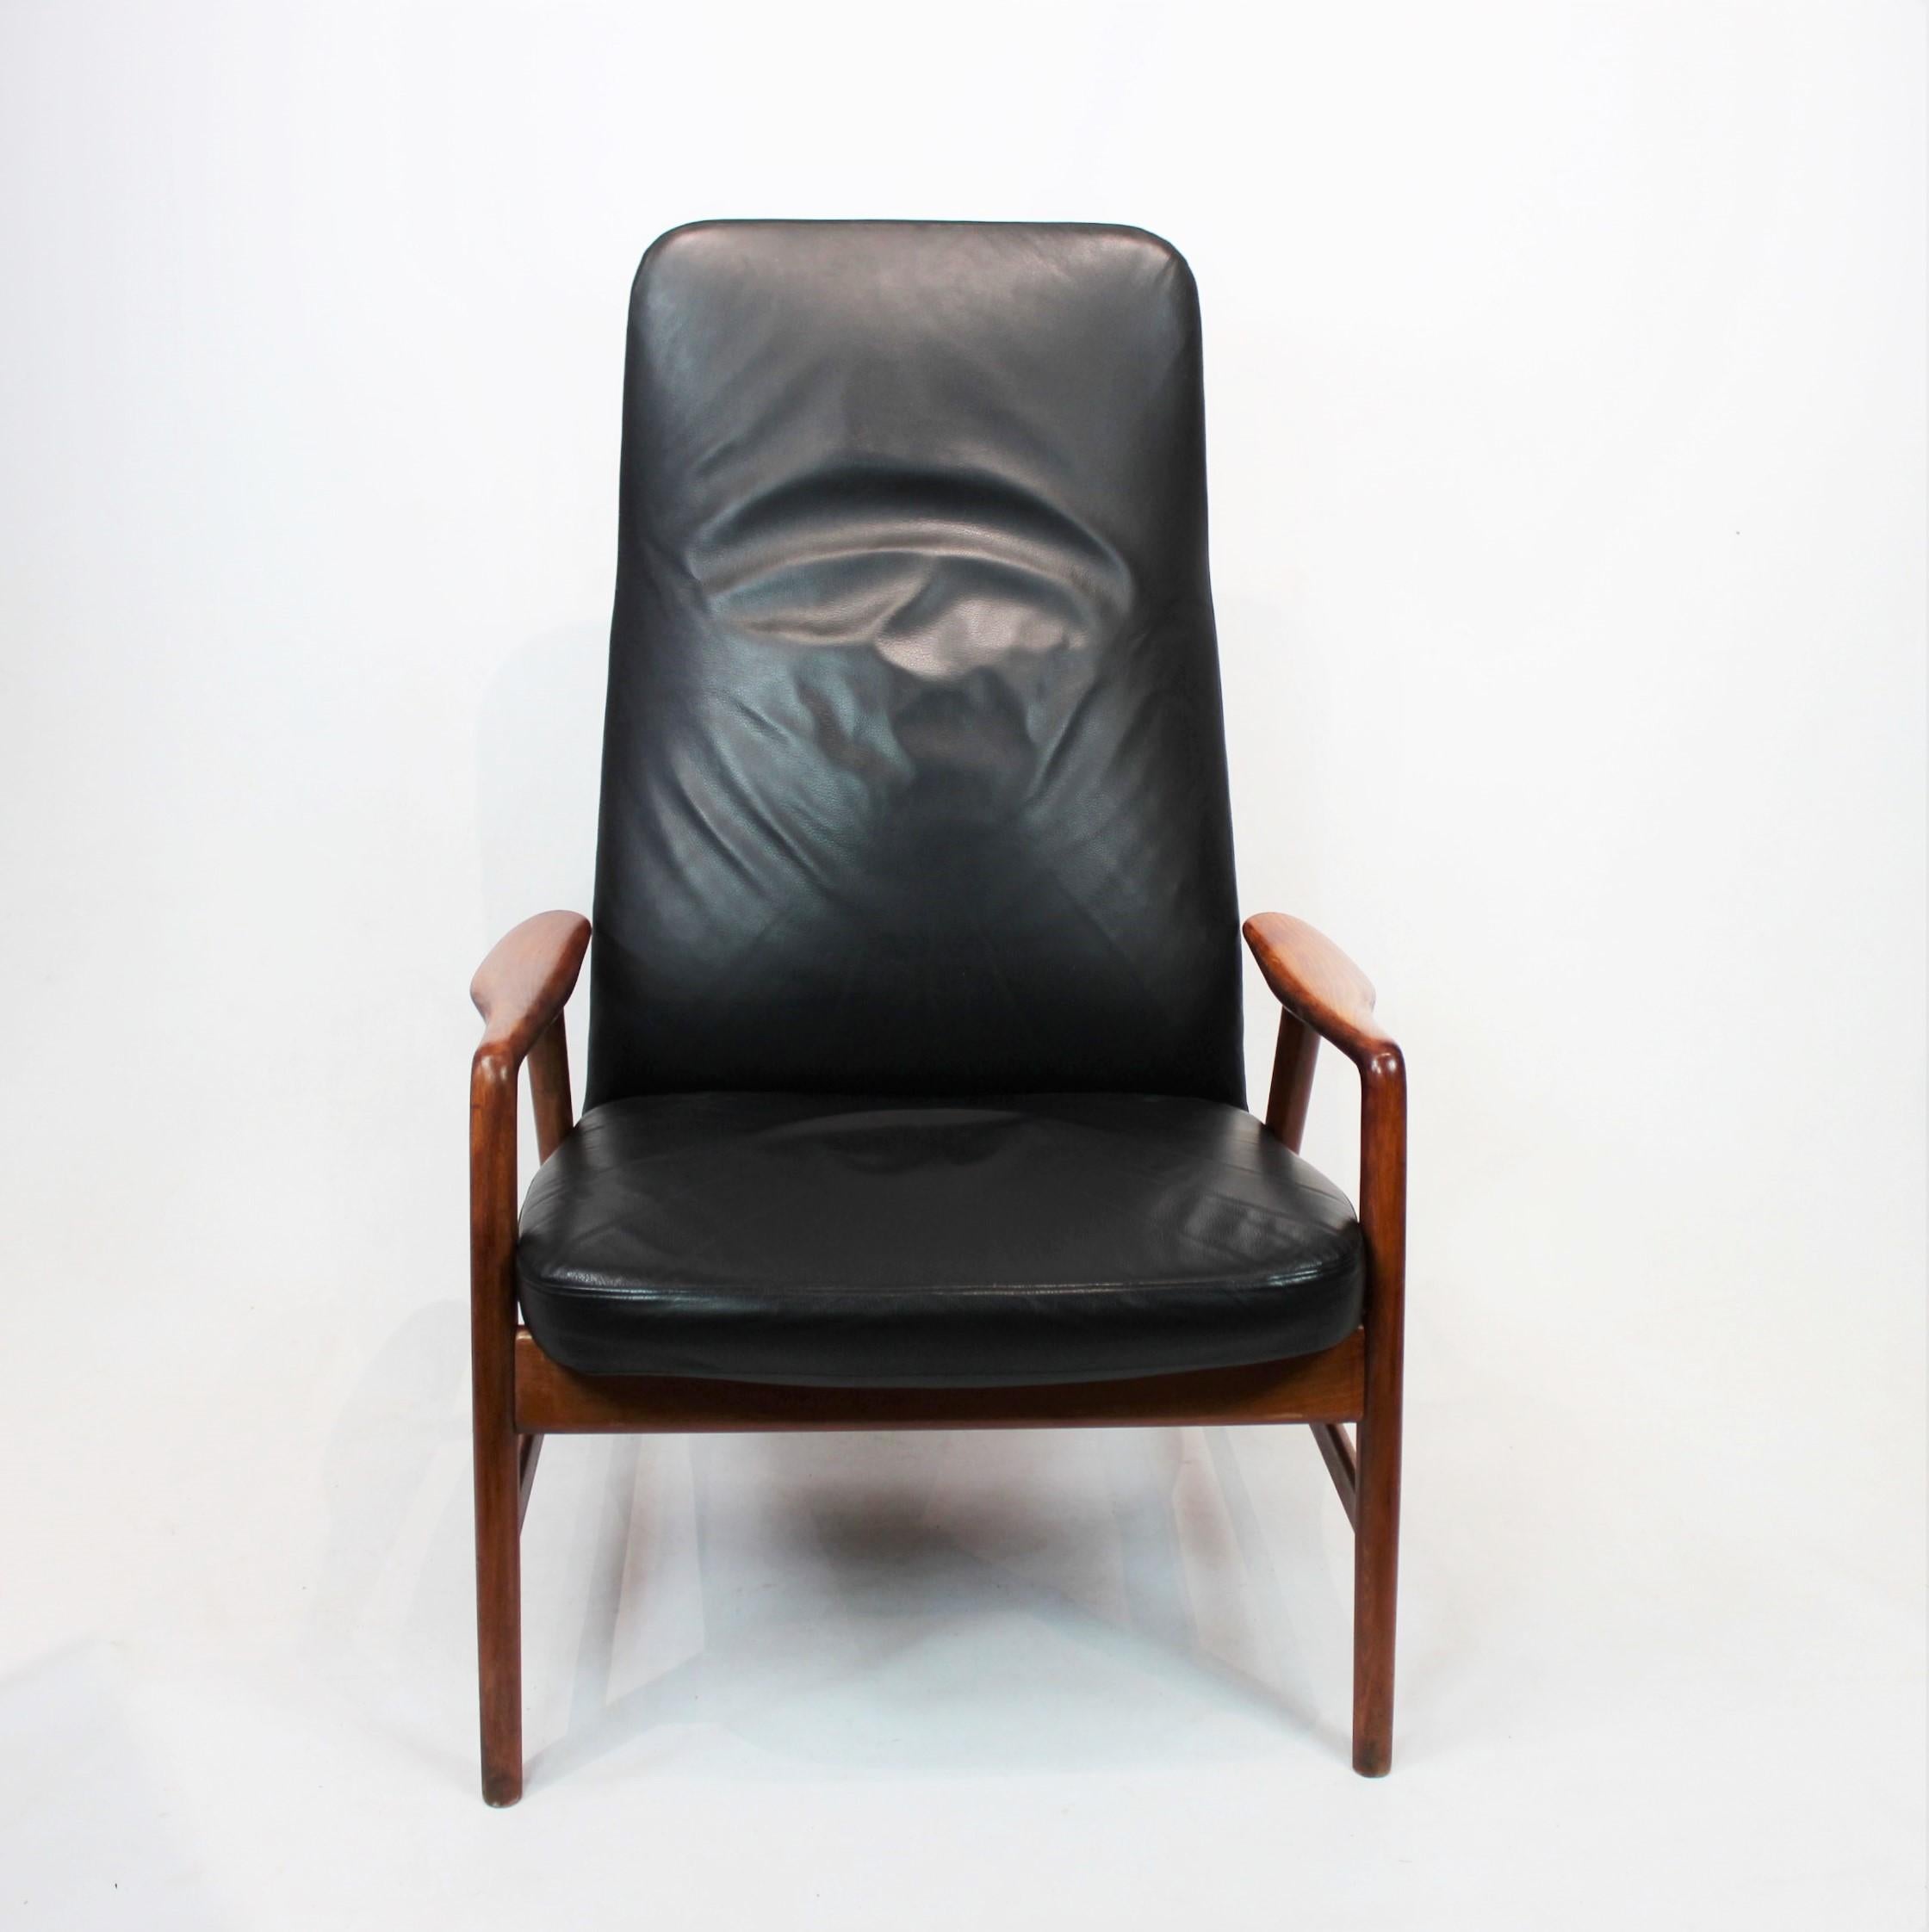 Easy chair of polished wood and black leather designed by Alf Svensson and manufactured by Fritz Hansen in the 1960s. The chair is in great vintage condition and the back can be adjusted.